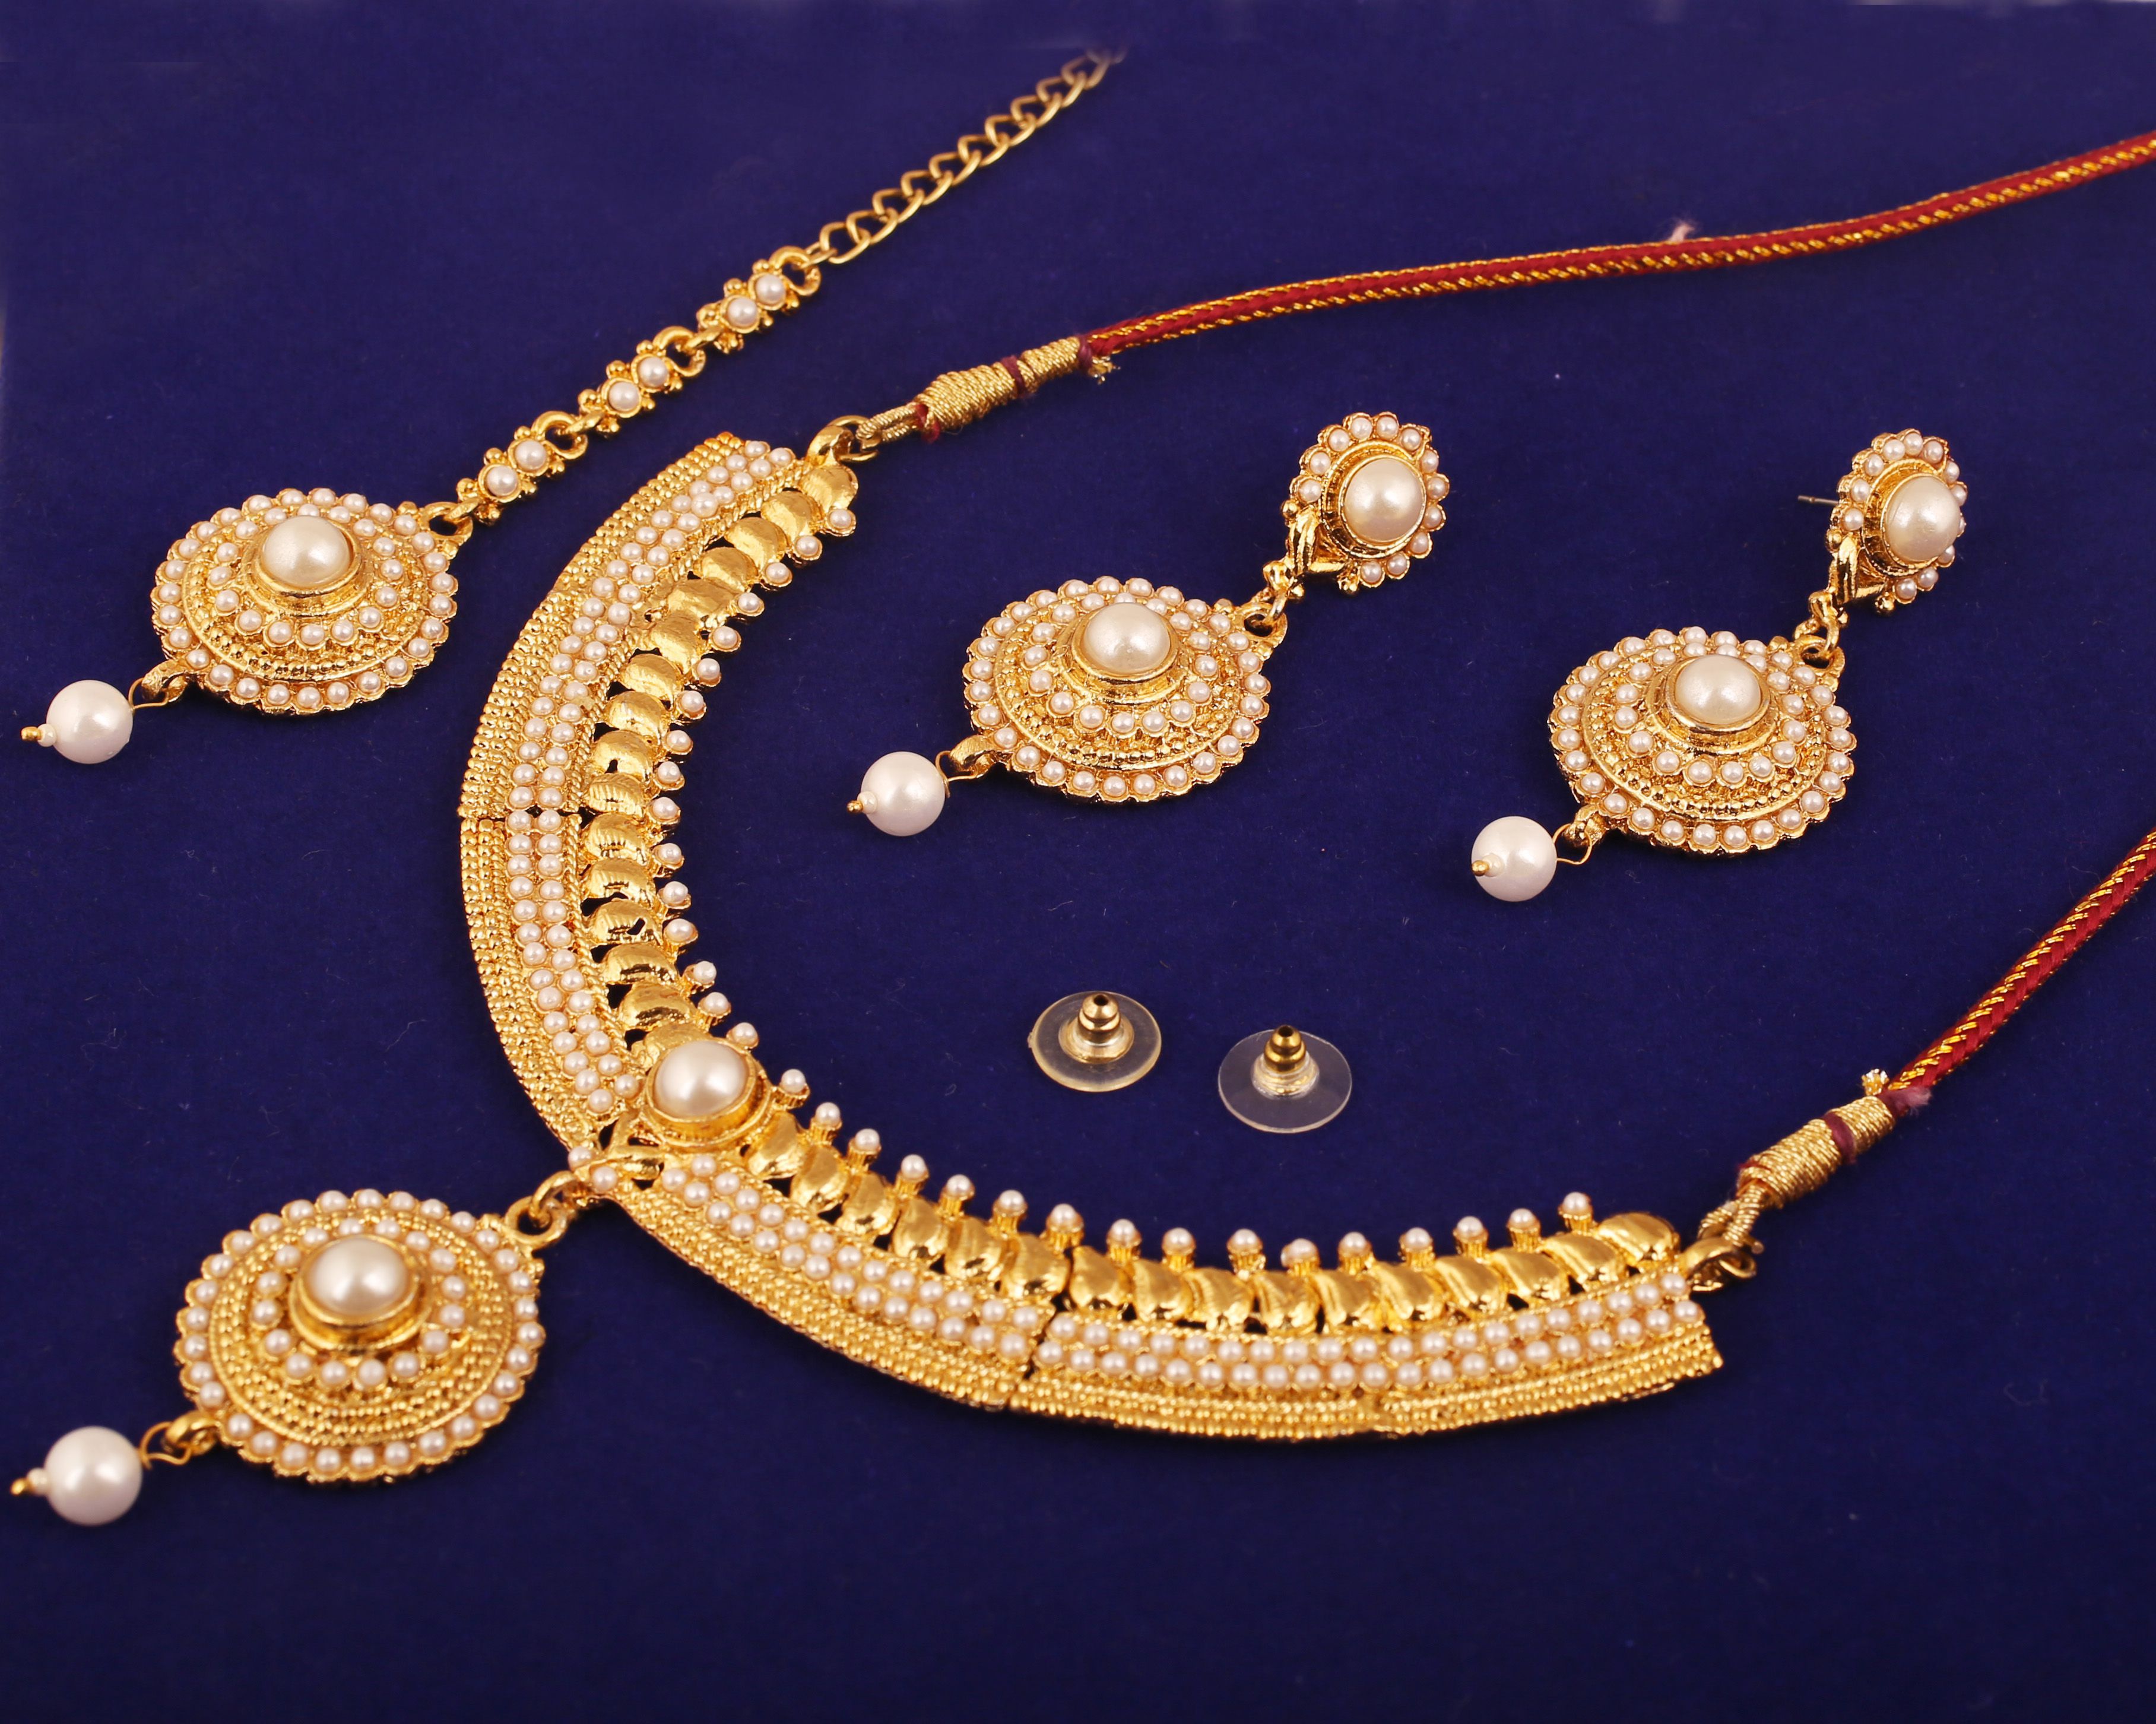 Touchstone Ethnic South Indian Stunning Look Exclusive Style Designer Bridal Jewelry Necklace